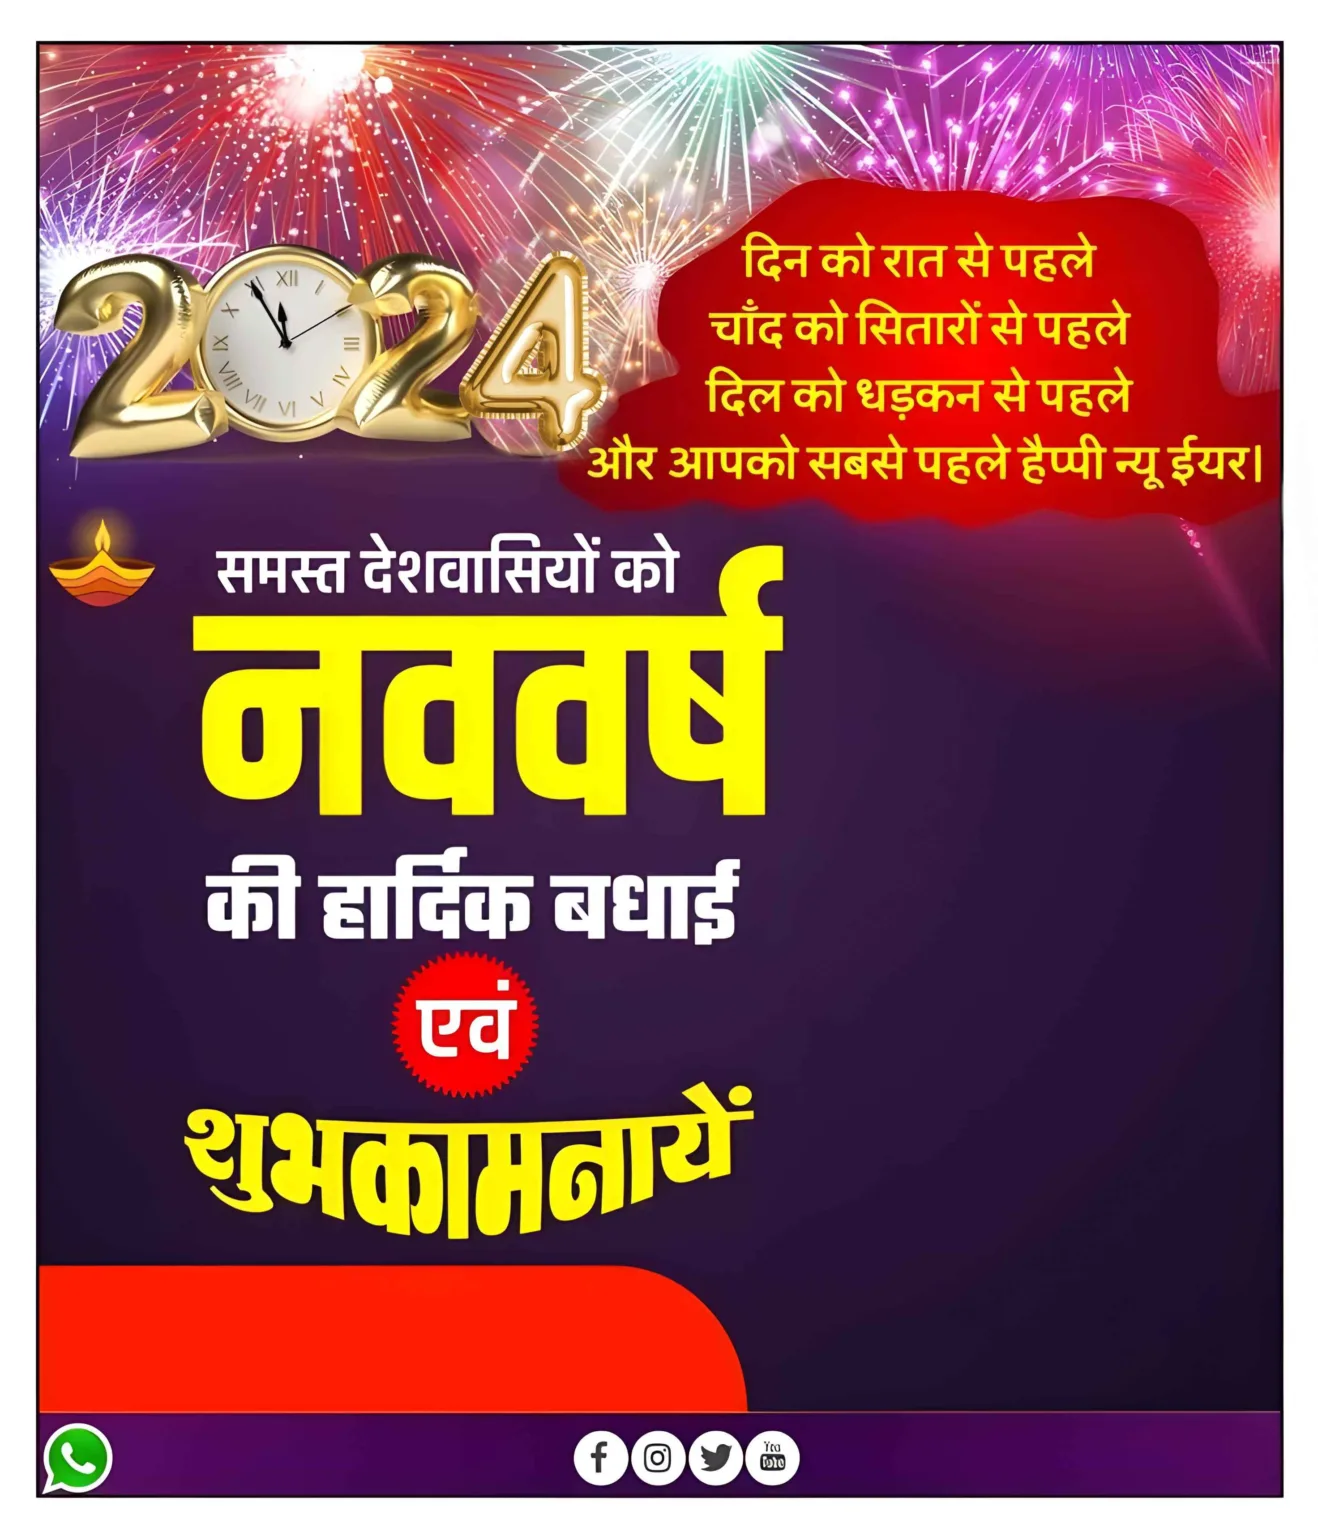 New Year Poster Background HD in Hindi